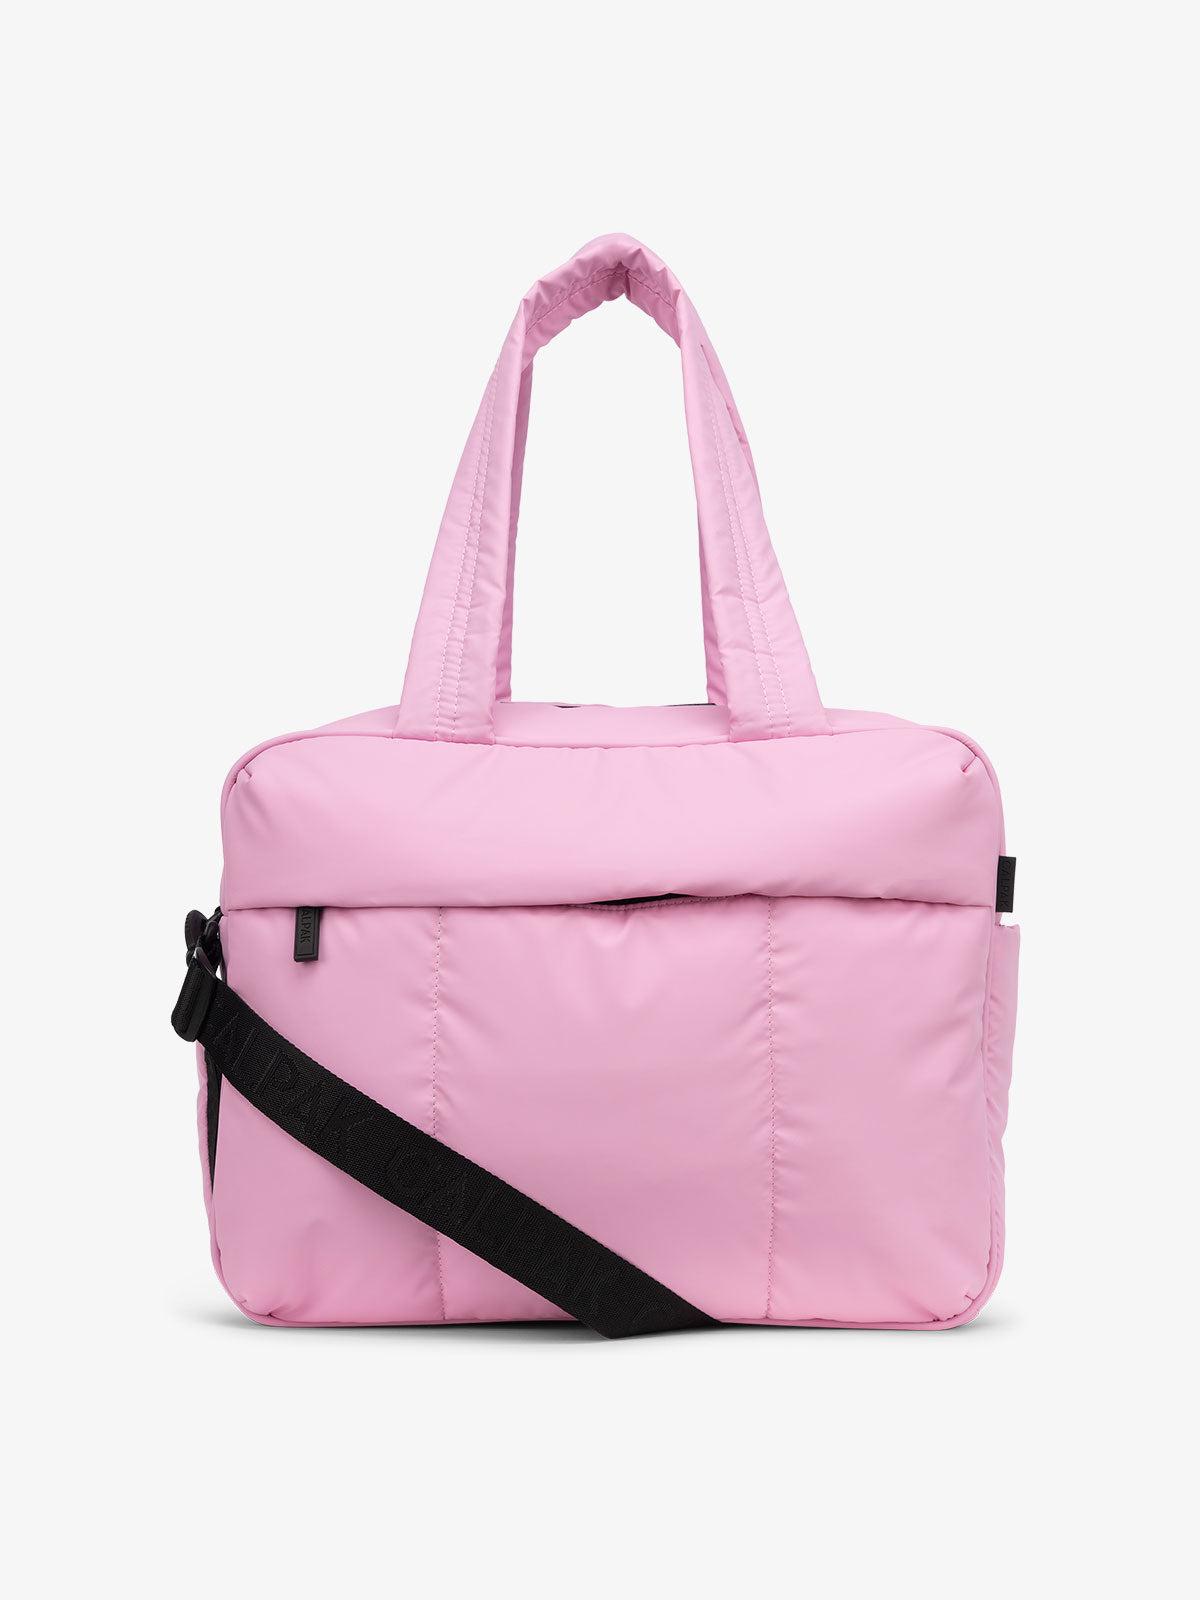 CALPAK Luka Duffel puffy Bag with detachable strap and zippered front pocket in pink